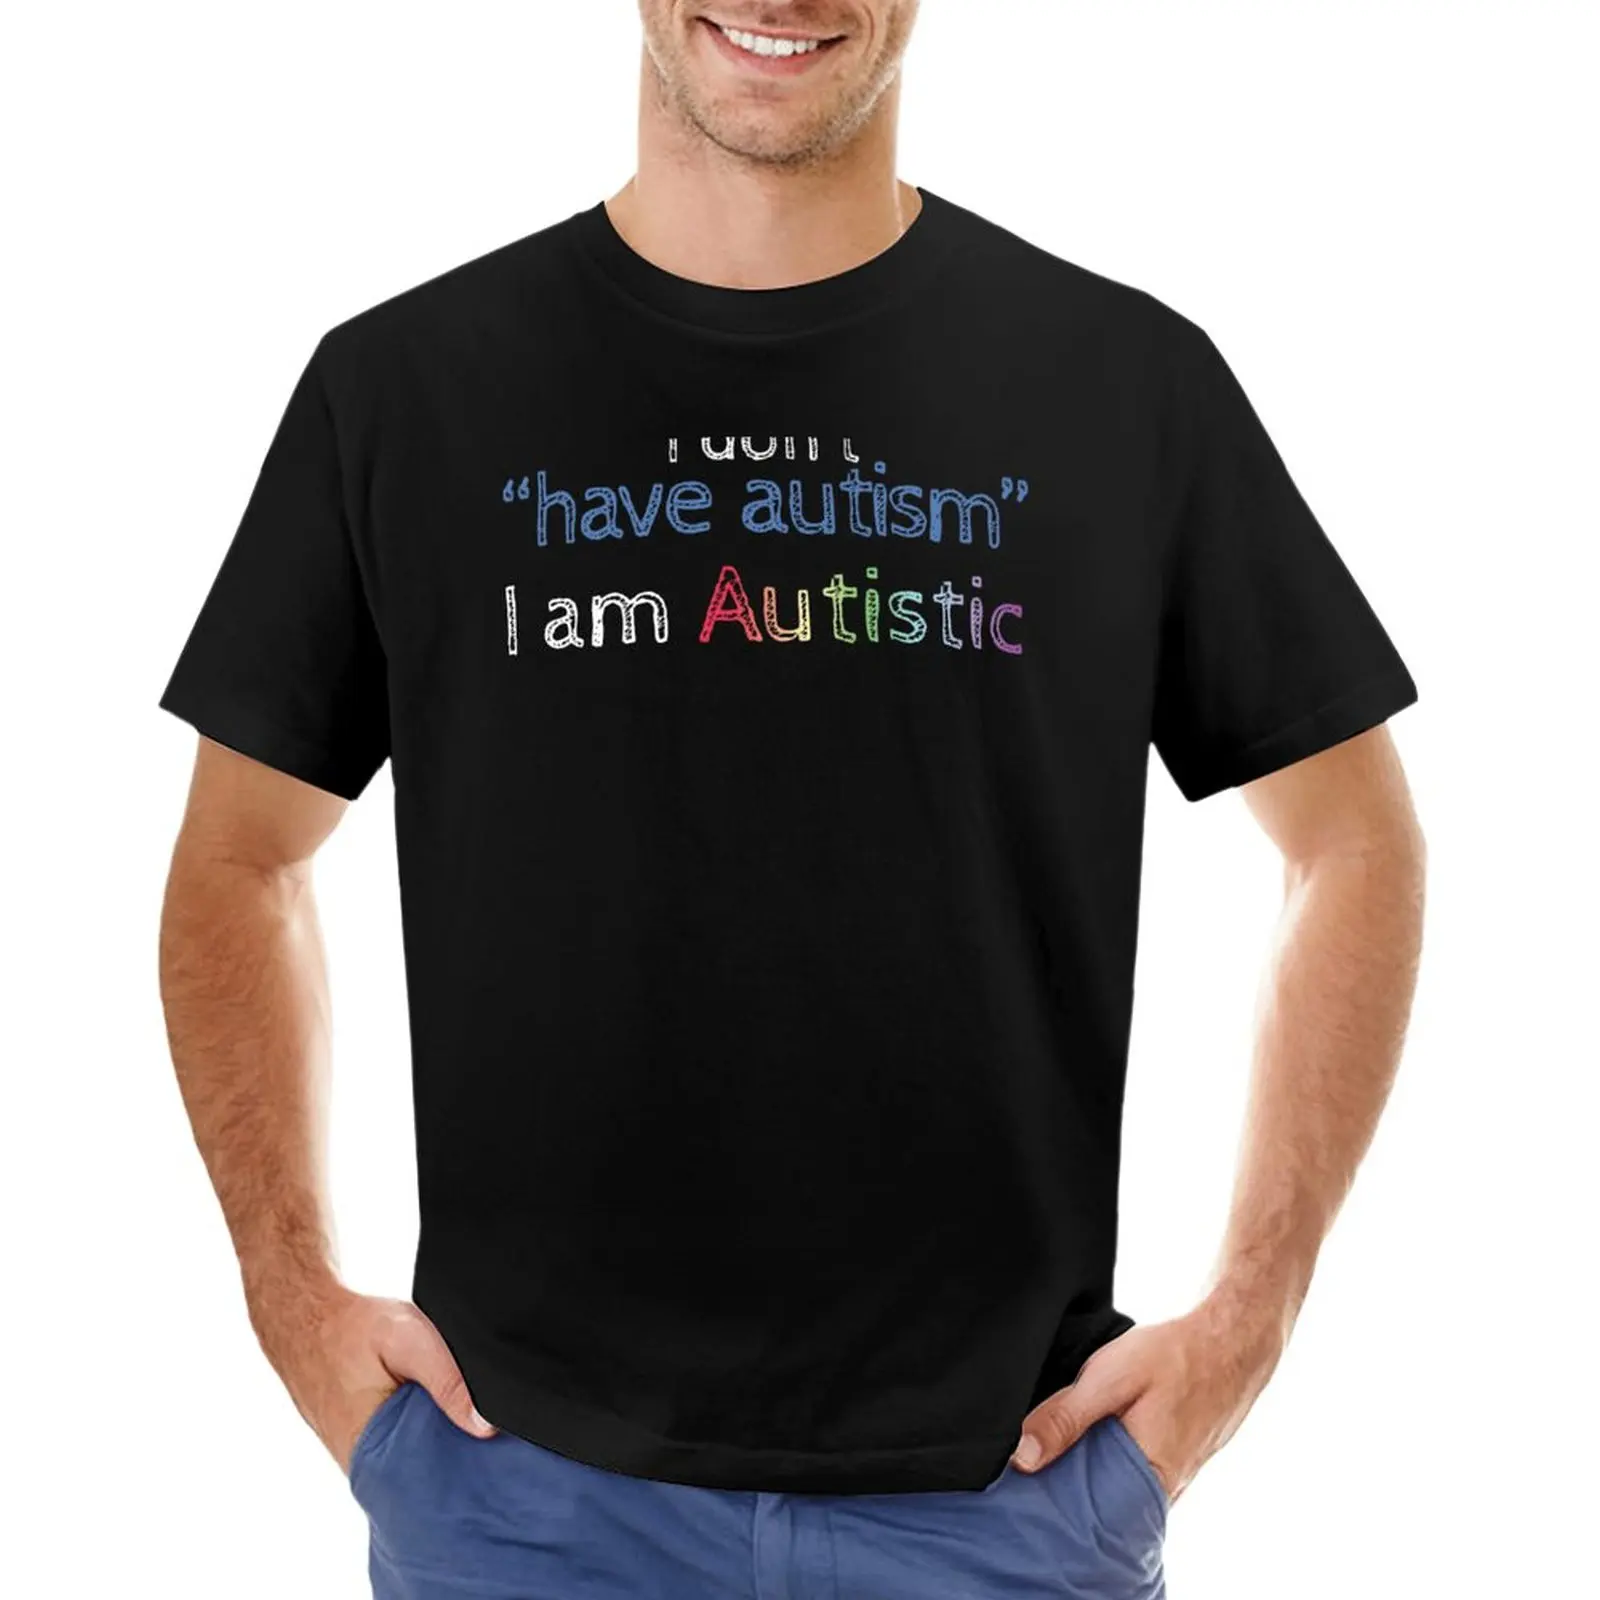 

I Don't Have Autism(Sketchy) T-Shirt boys white t shirts Aesthetic clothing Men's cotton t-shirt